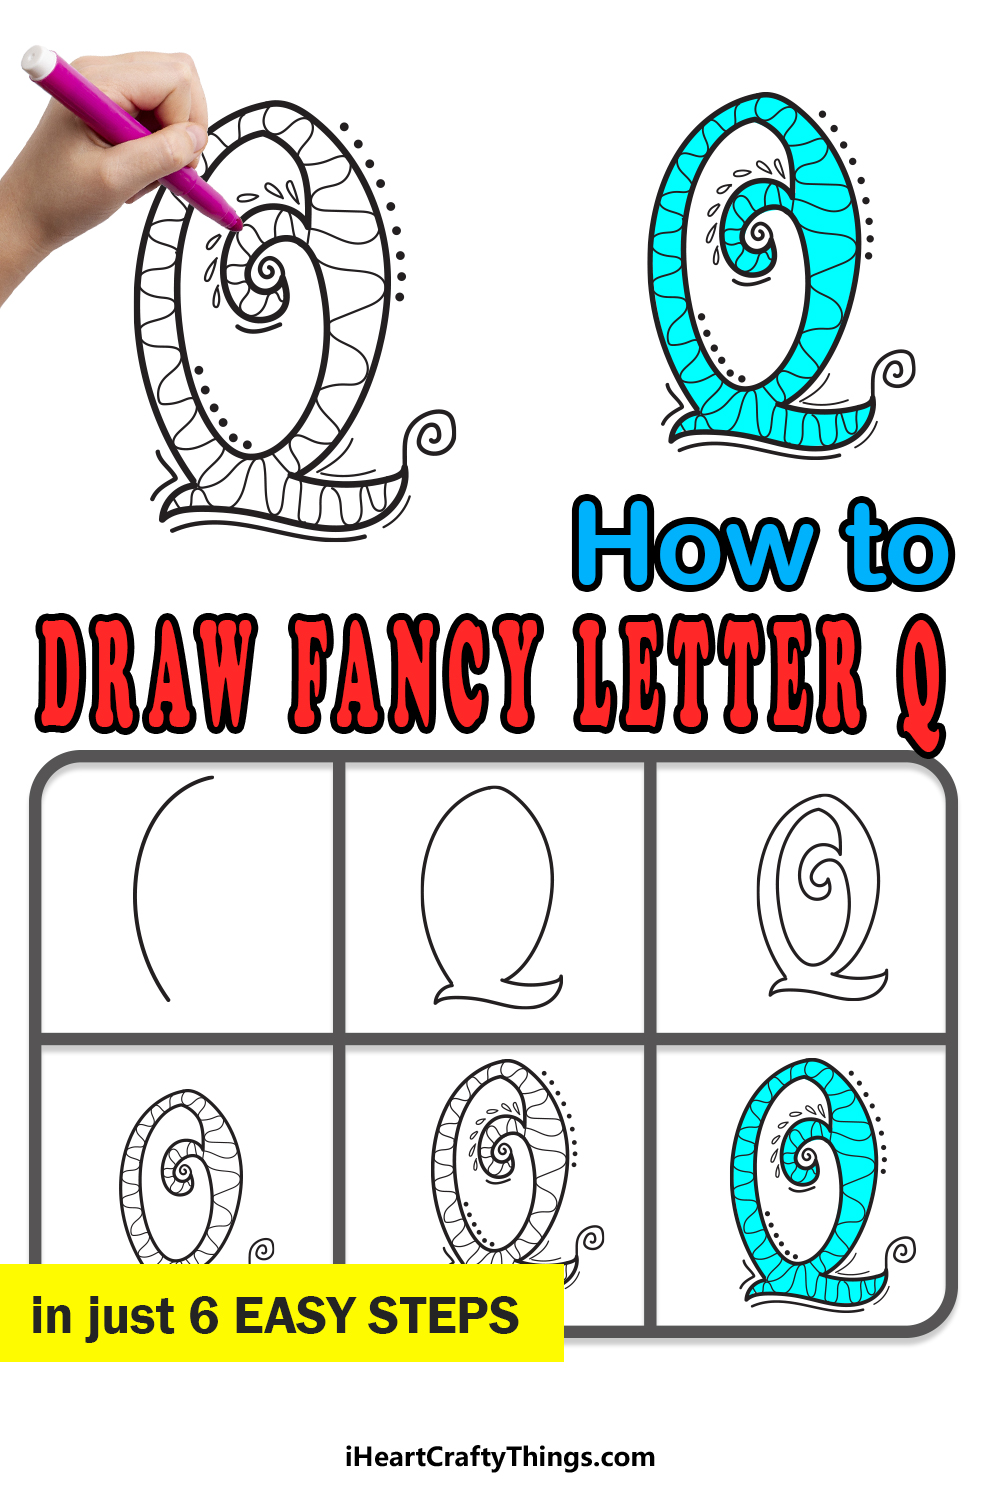 How To Draw Your Own Fancy Q step by step guide